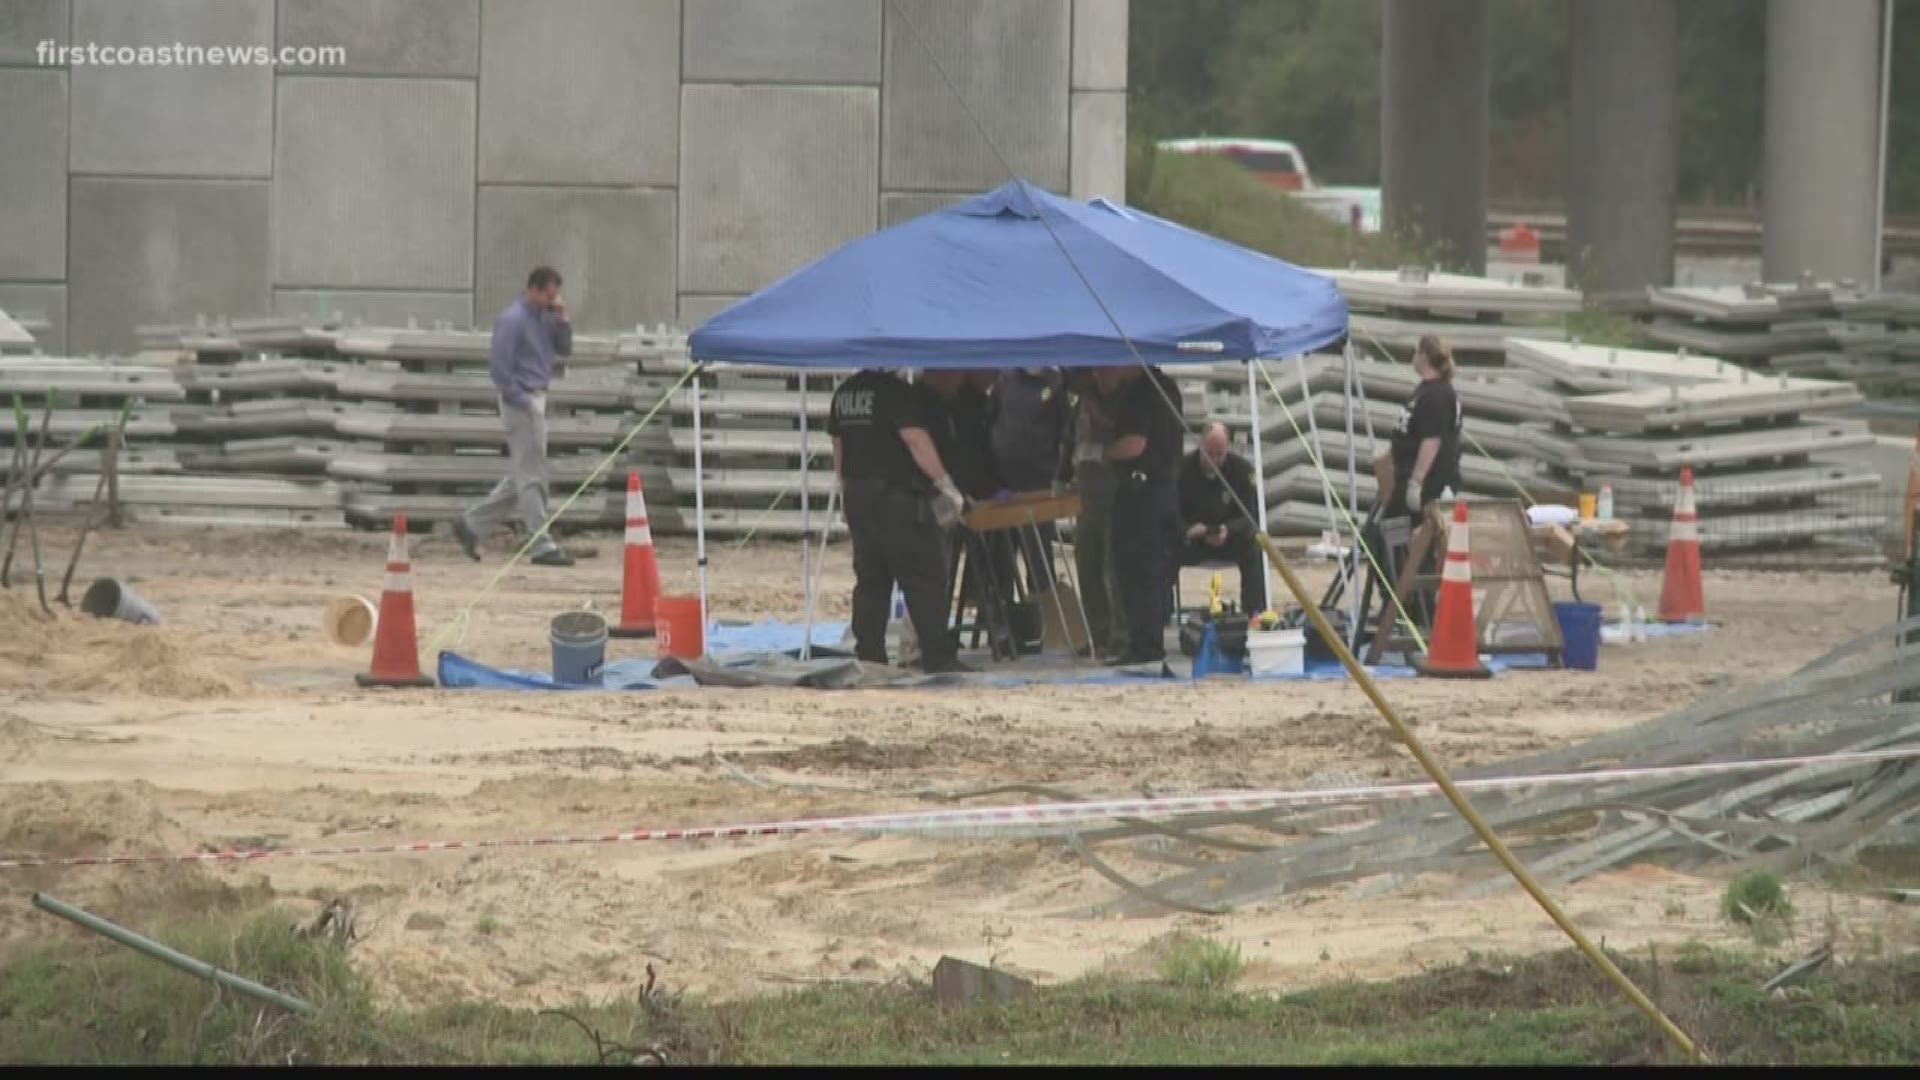 The bones are being taken to the medical examiner so that the cause of death and identity can be determined.